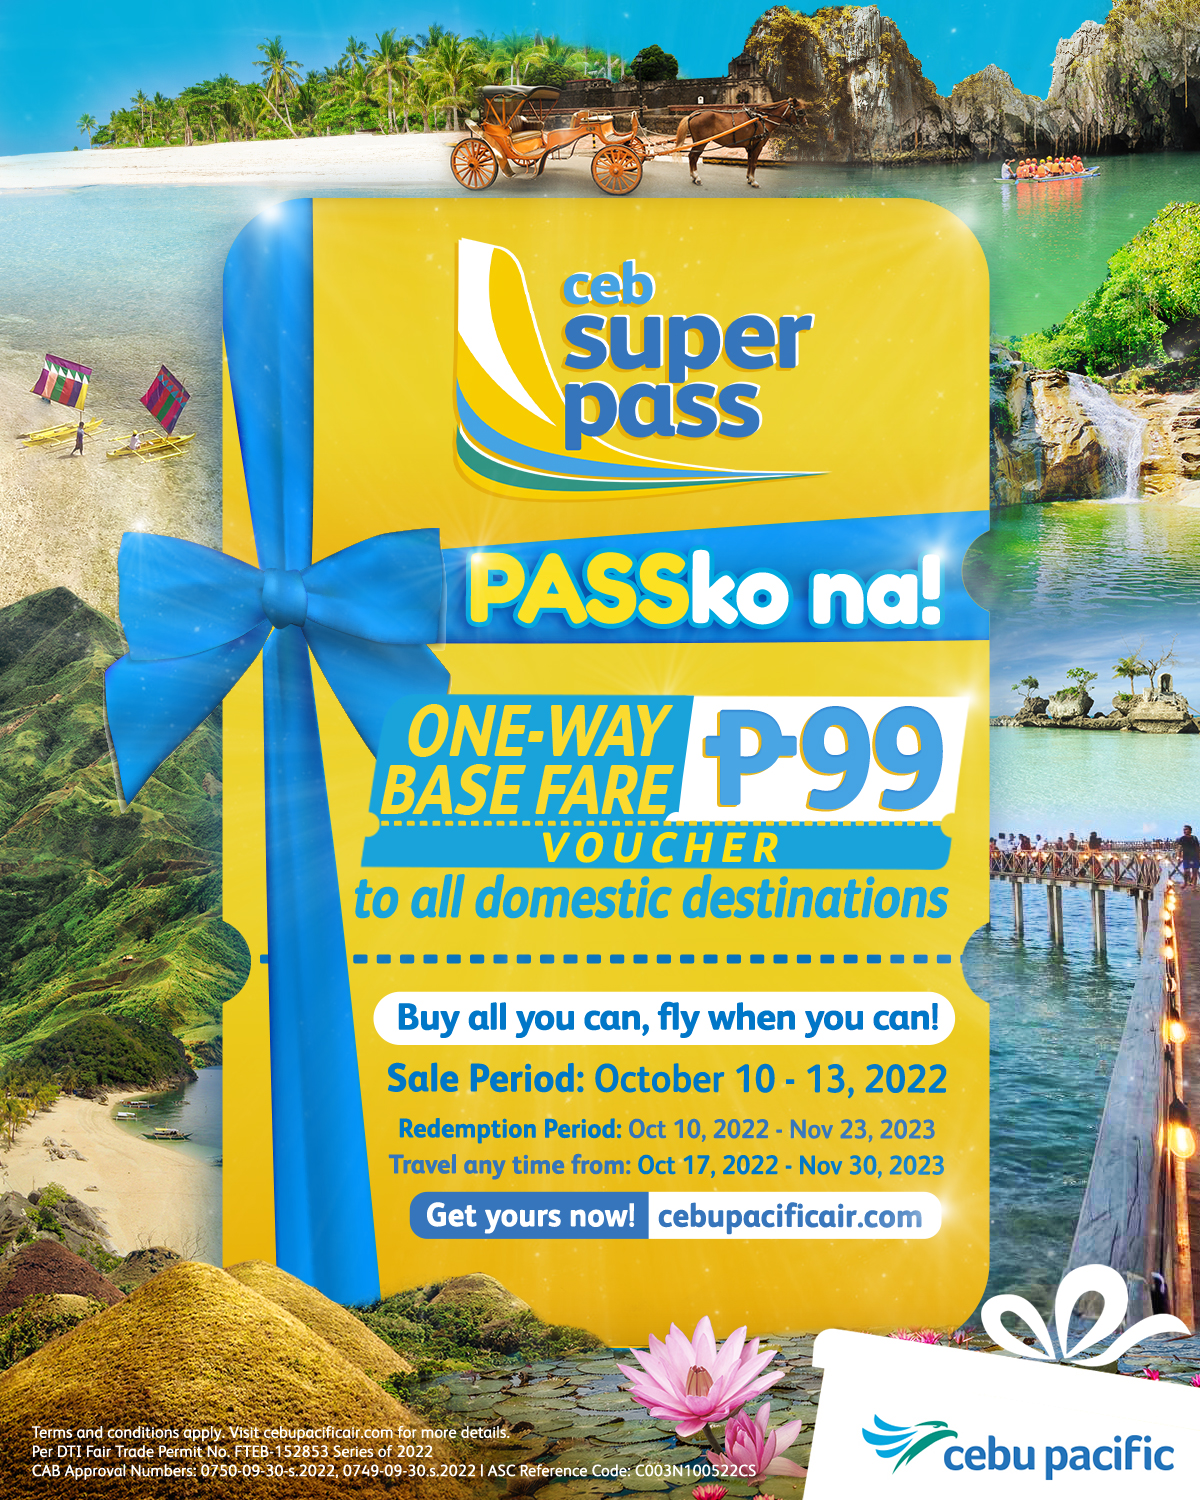 <strong>Cebu Pacific brings back CEB Super Pass this 10.10</strong>